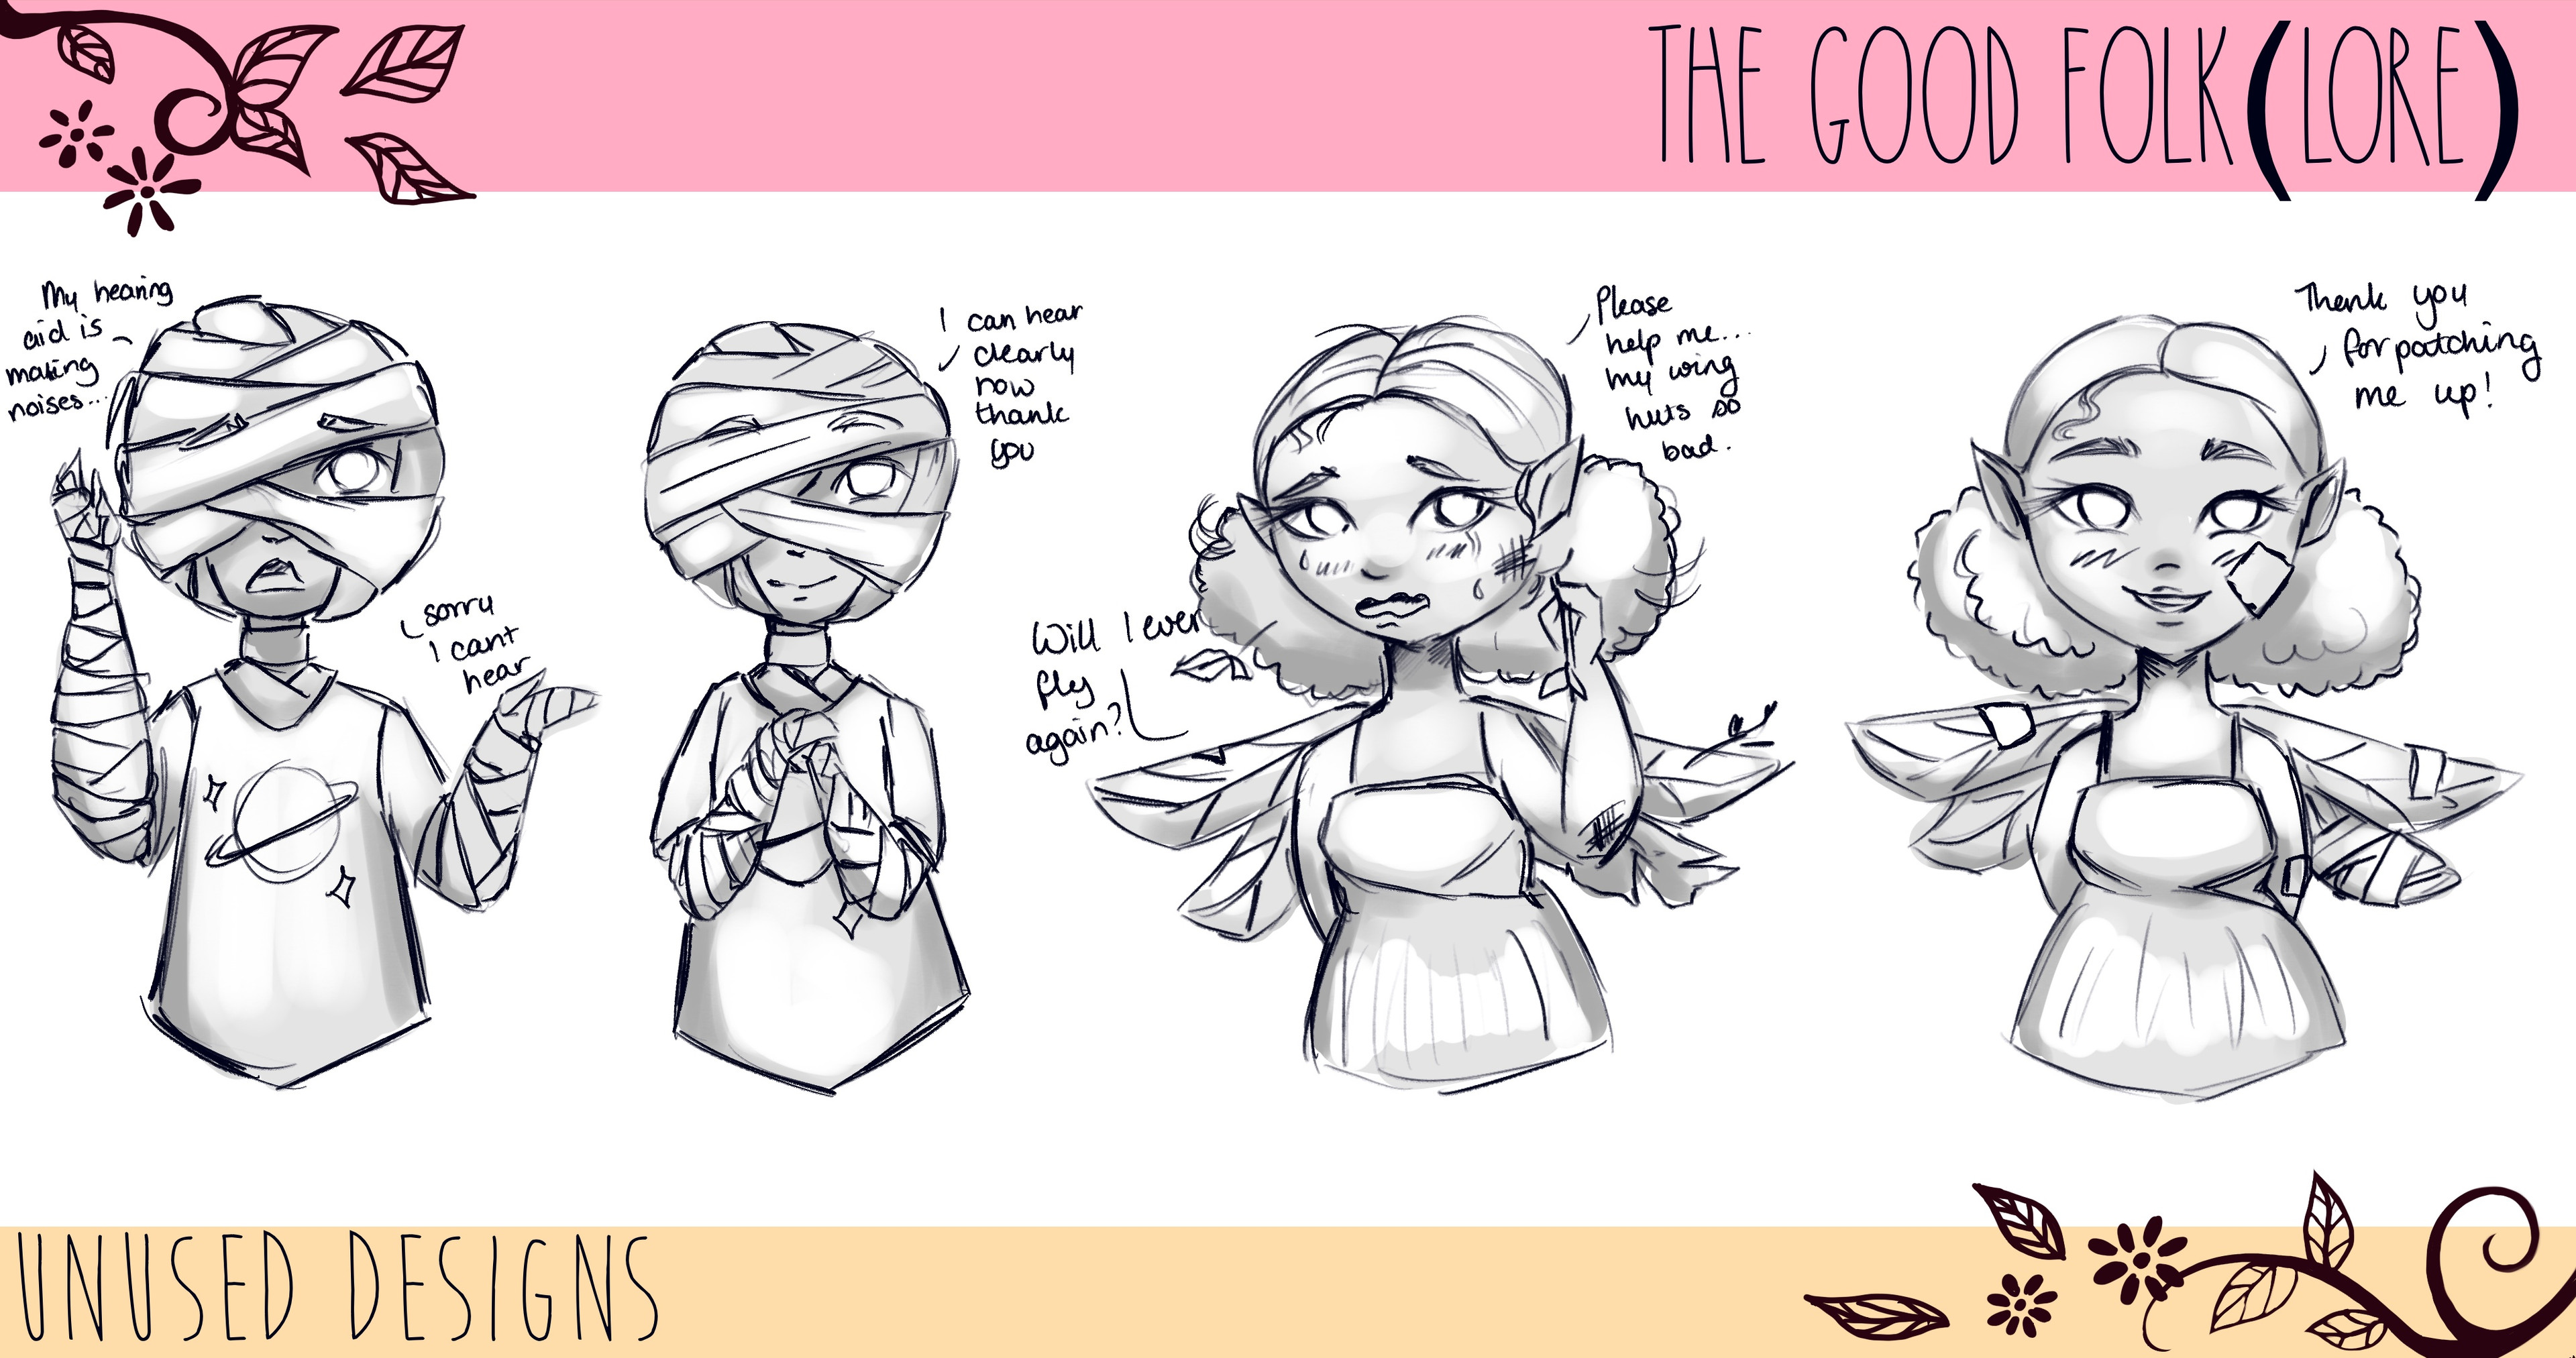 A mummy and pixie concepts!